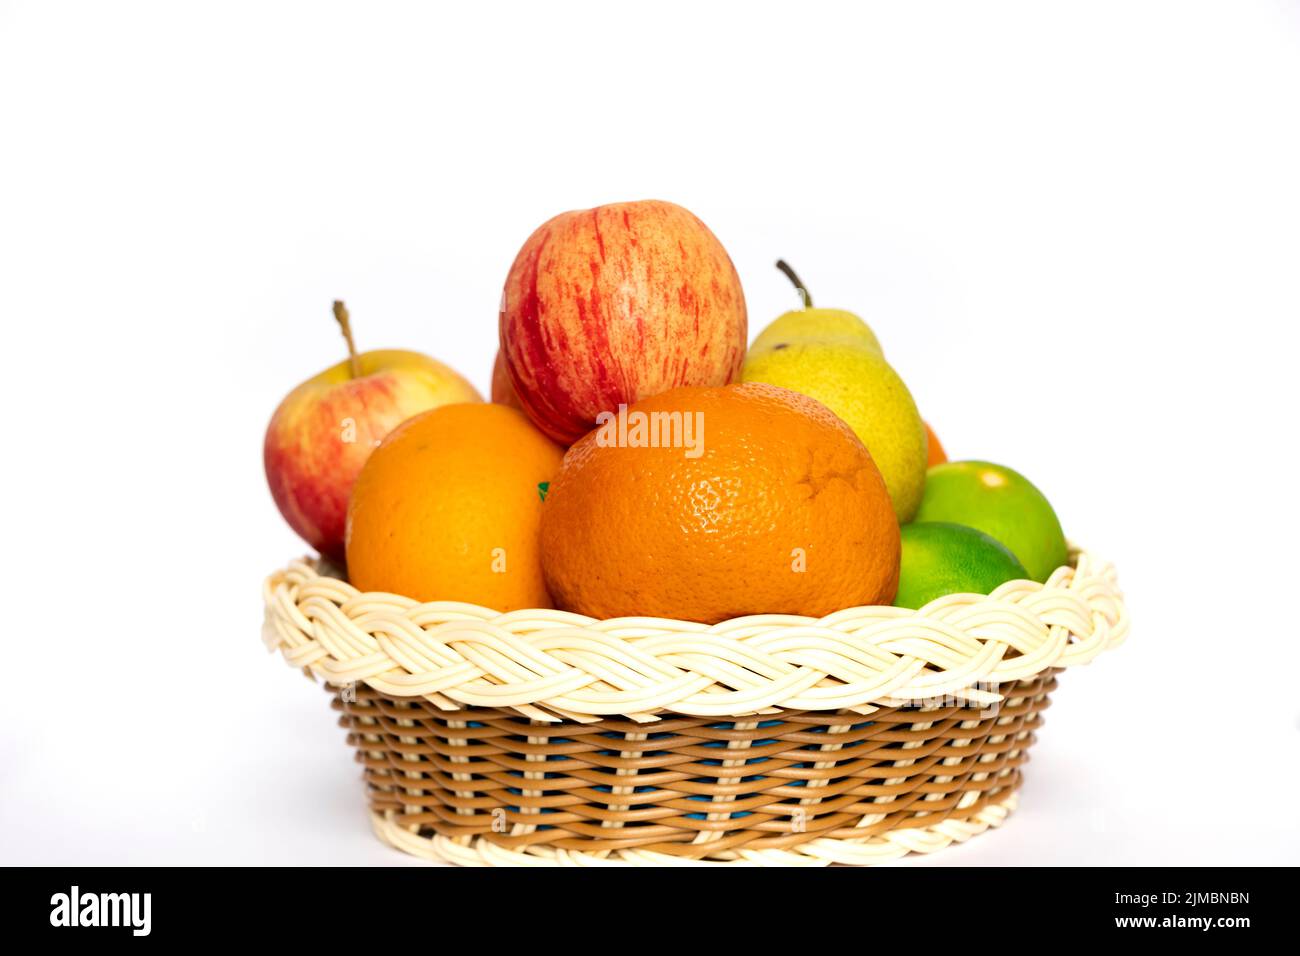 Closeup Image Of Tasty Fruits In Wooden Basket. Background White Stock Photo